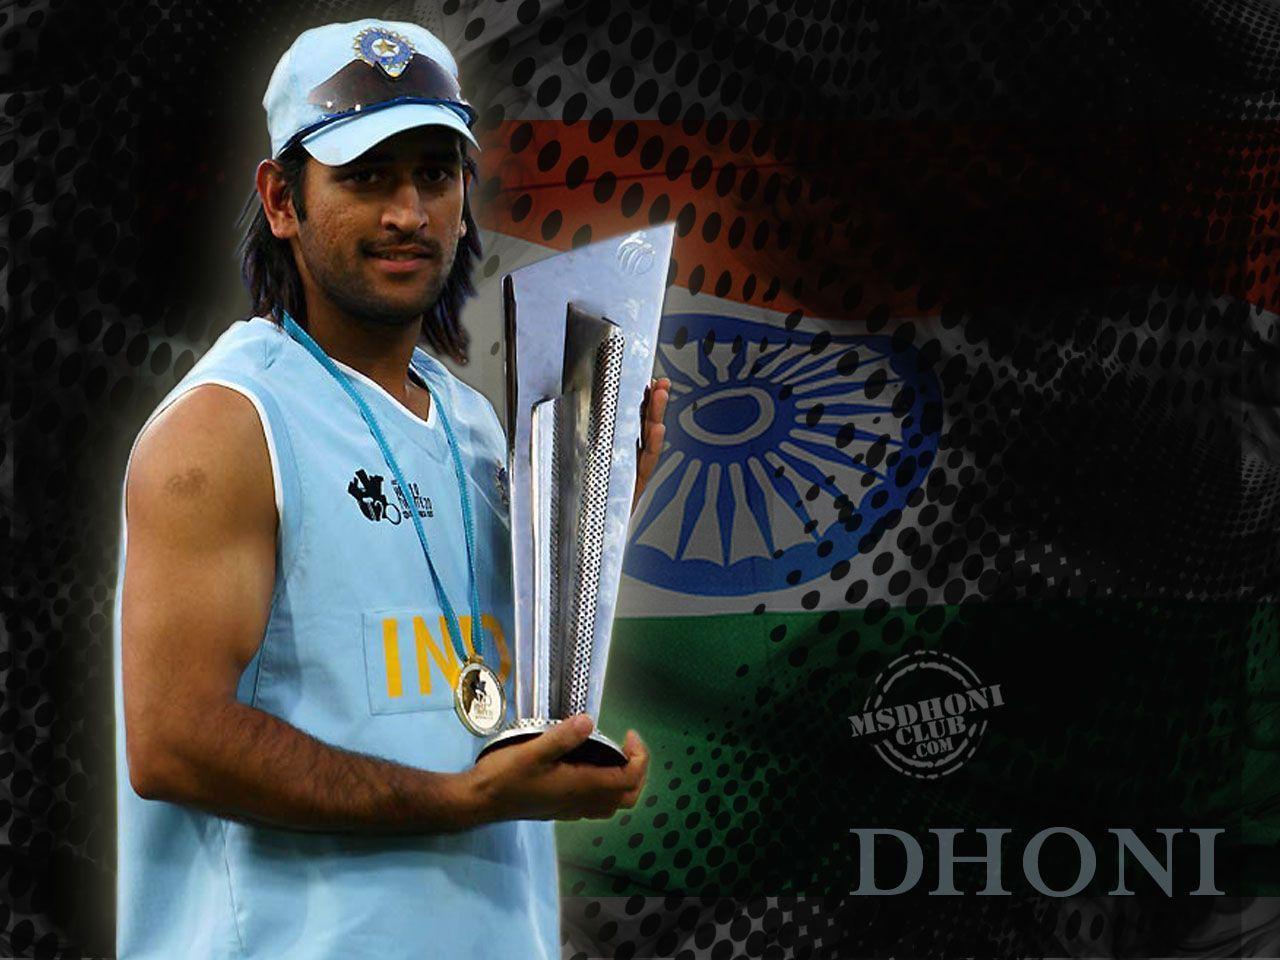 image about MS Dhoni wallpaper. About india